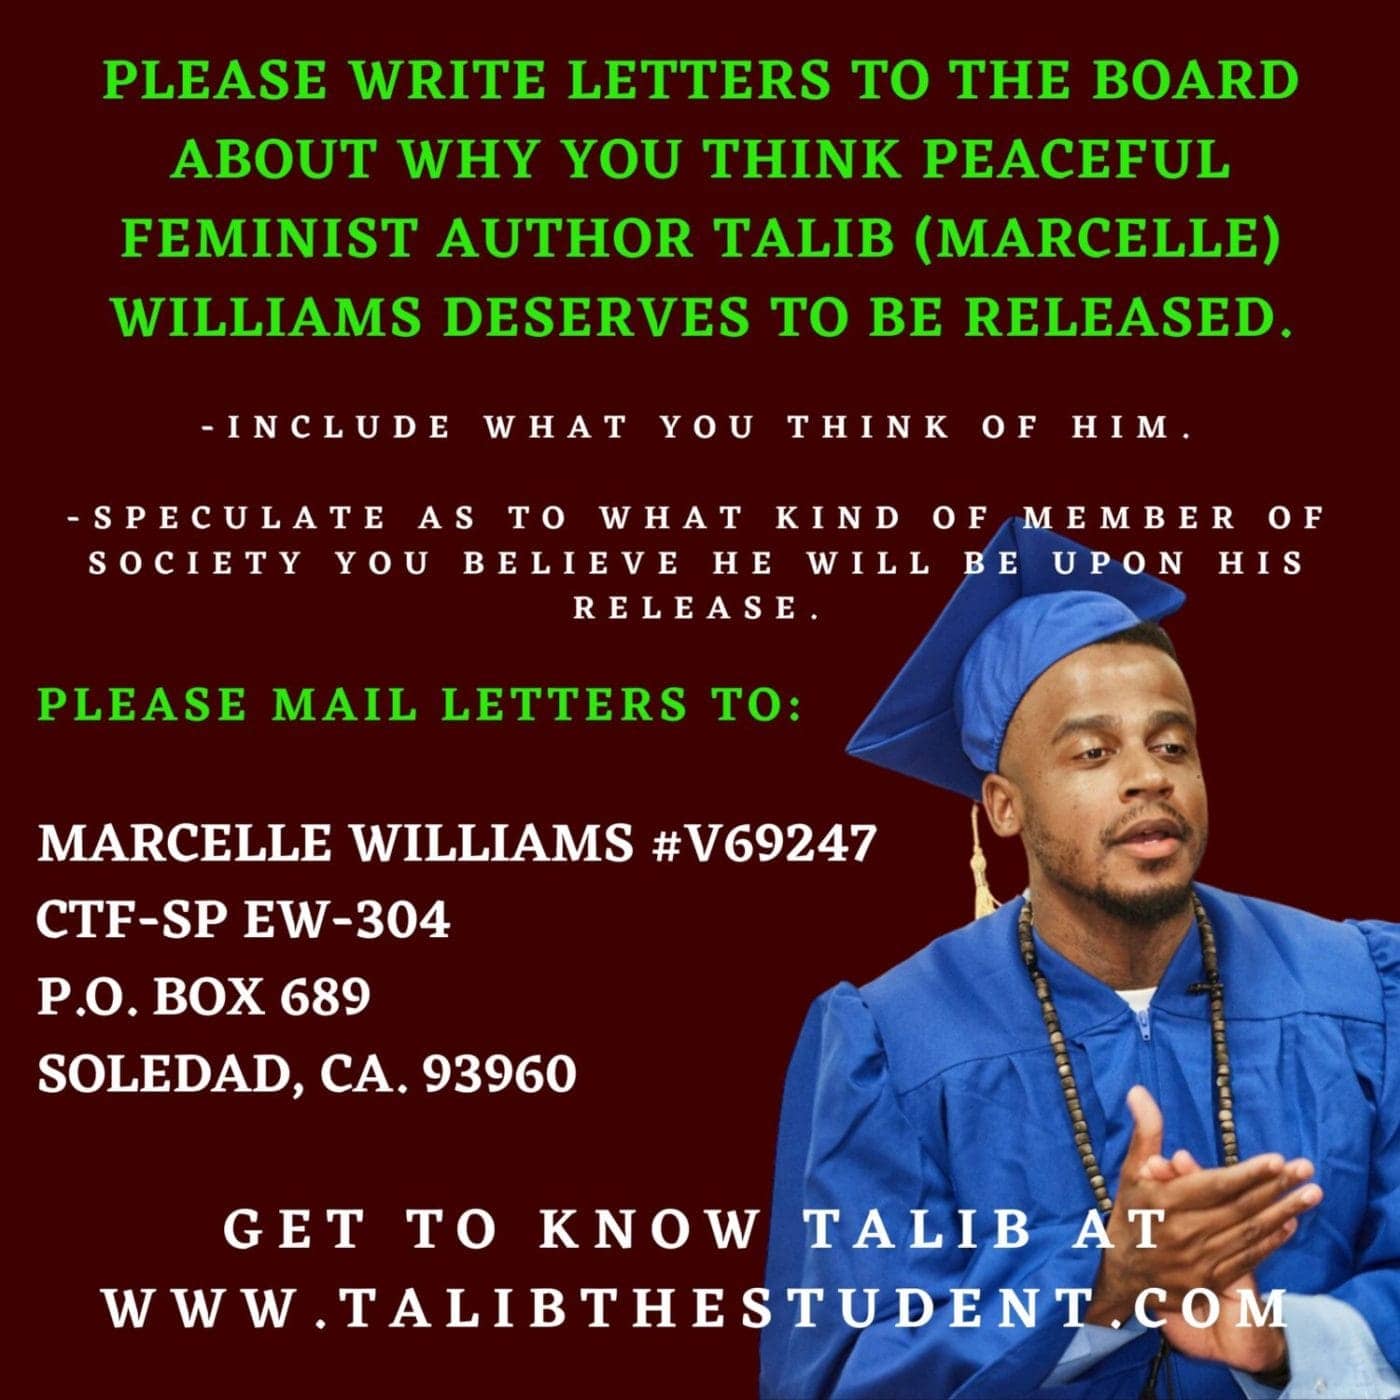 Support-Talib-Williams-with-parole-board-letters-poster-0221-1400x1400, 2020 Soledad raid on Black prisoners hits the courtroom, Behind Enemy Lines 